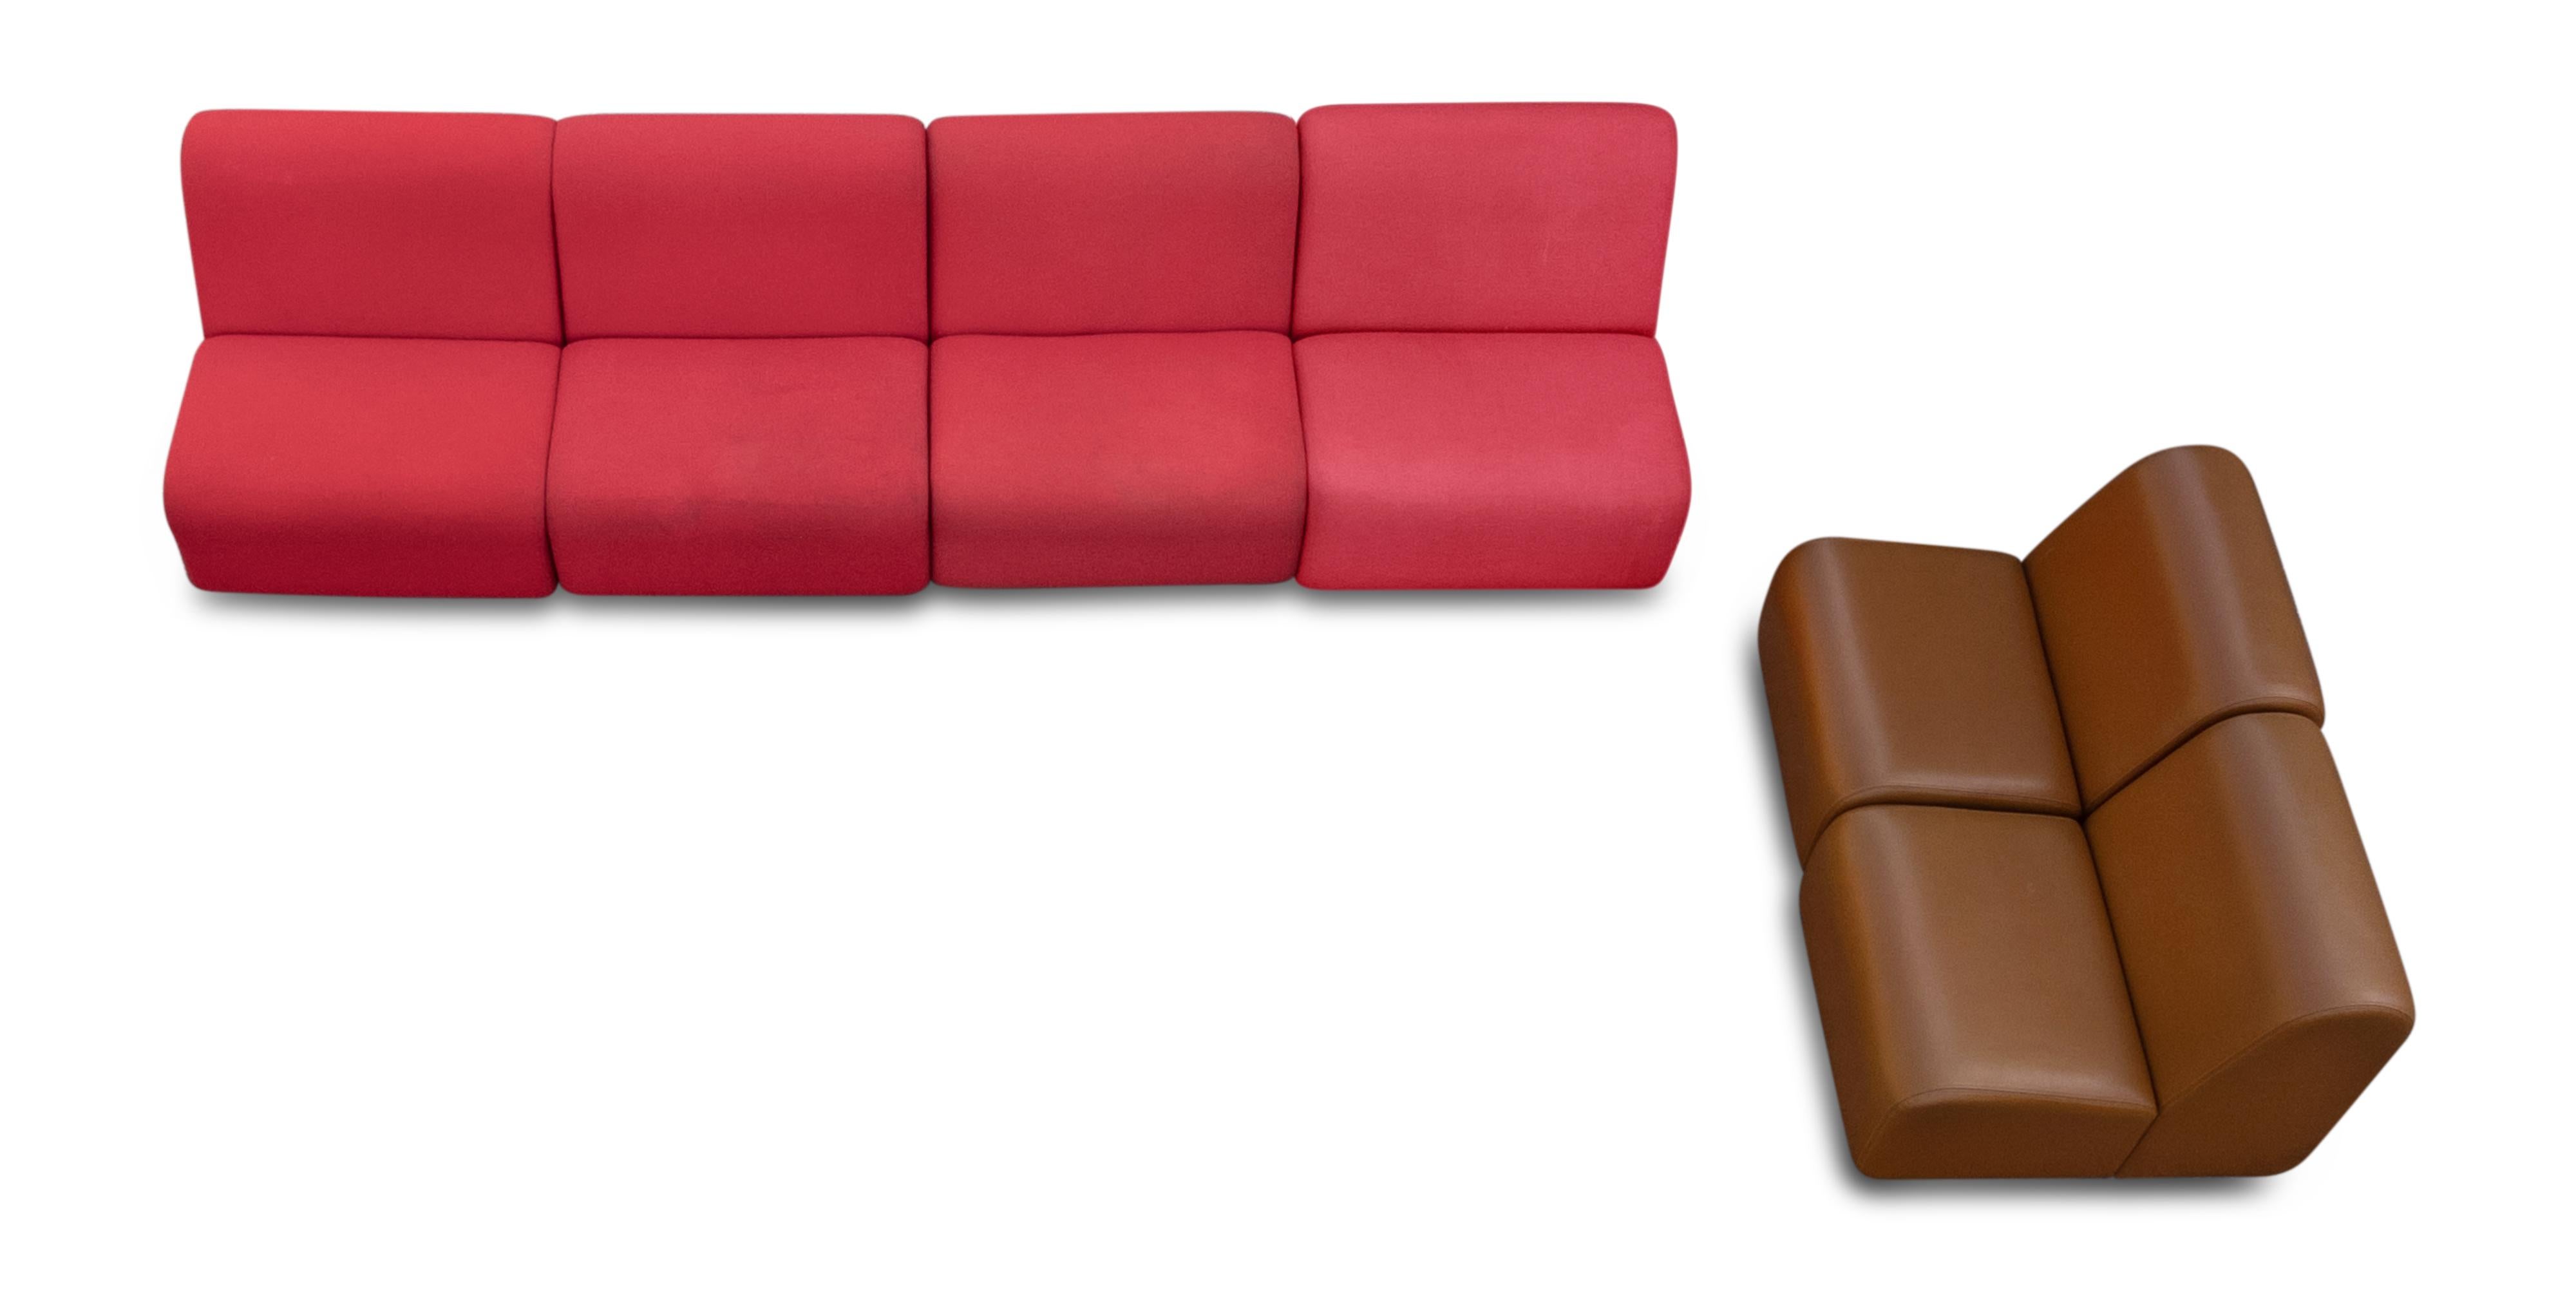 Fabric John Mascheroni 6 Piece Sectional Sofa for Vecta Contract Red & Brown Upholstery For Sale